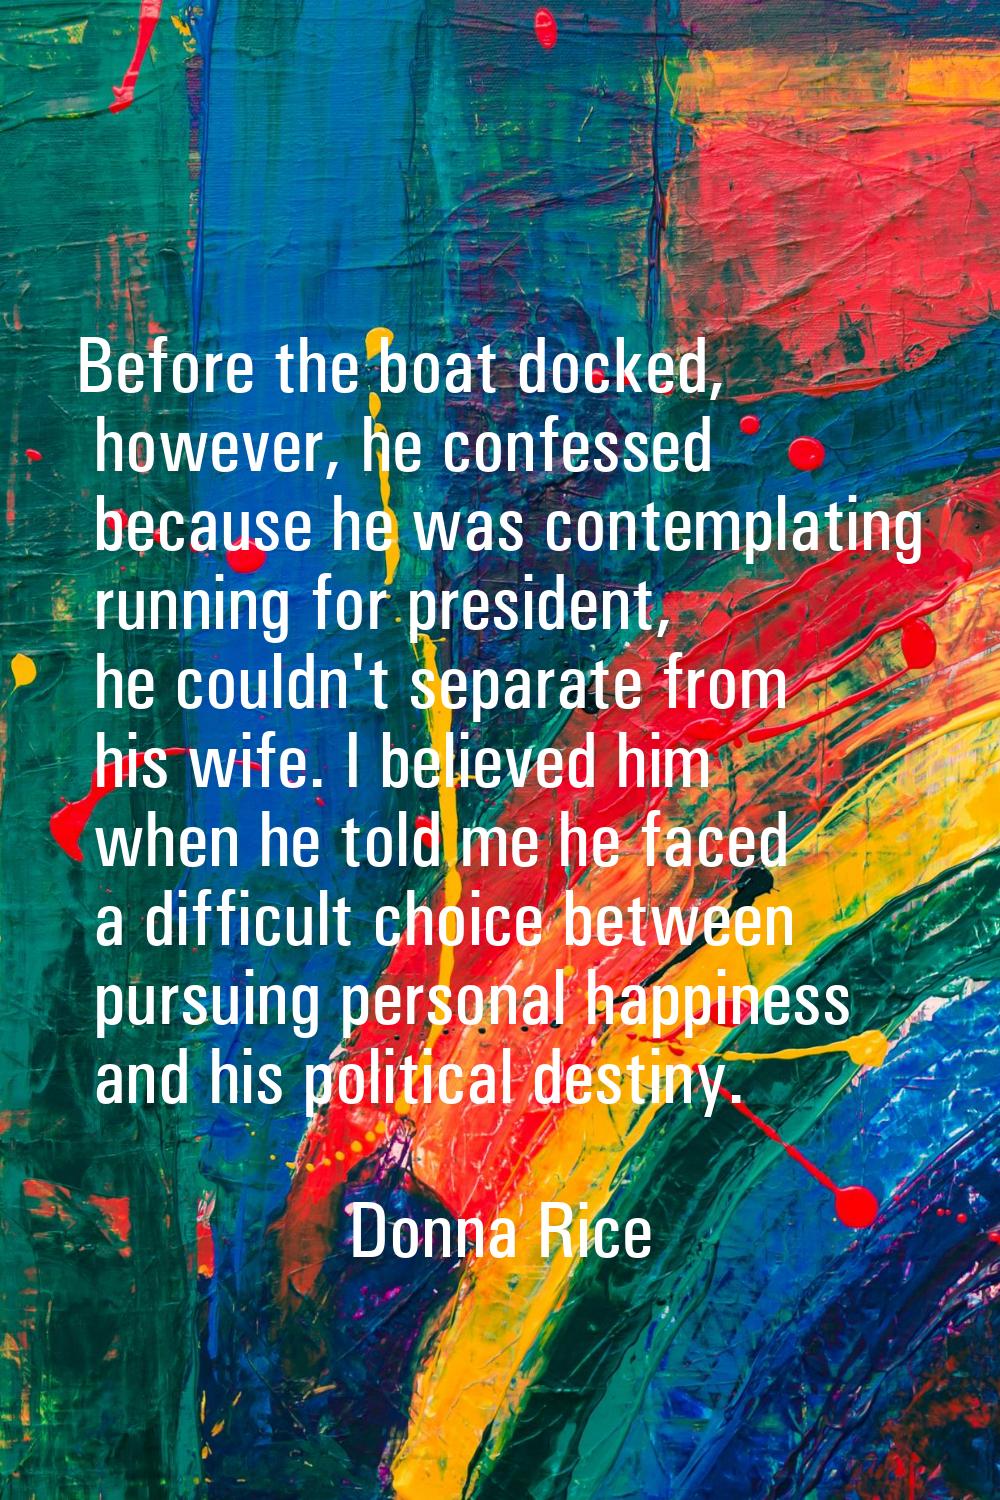 Before the boat docked, however, he confessed because he was contemplating running for president, h